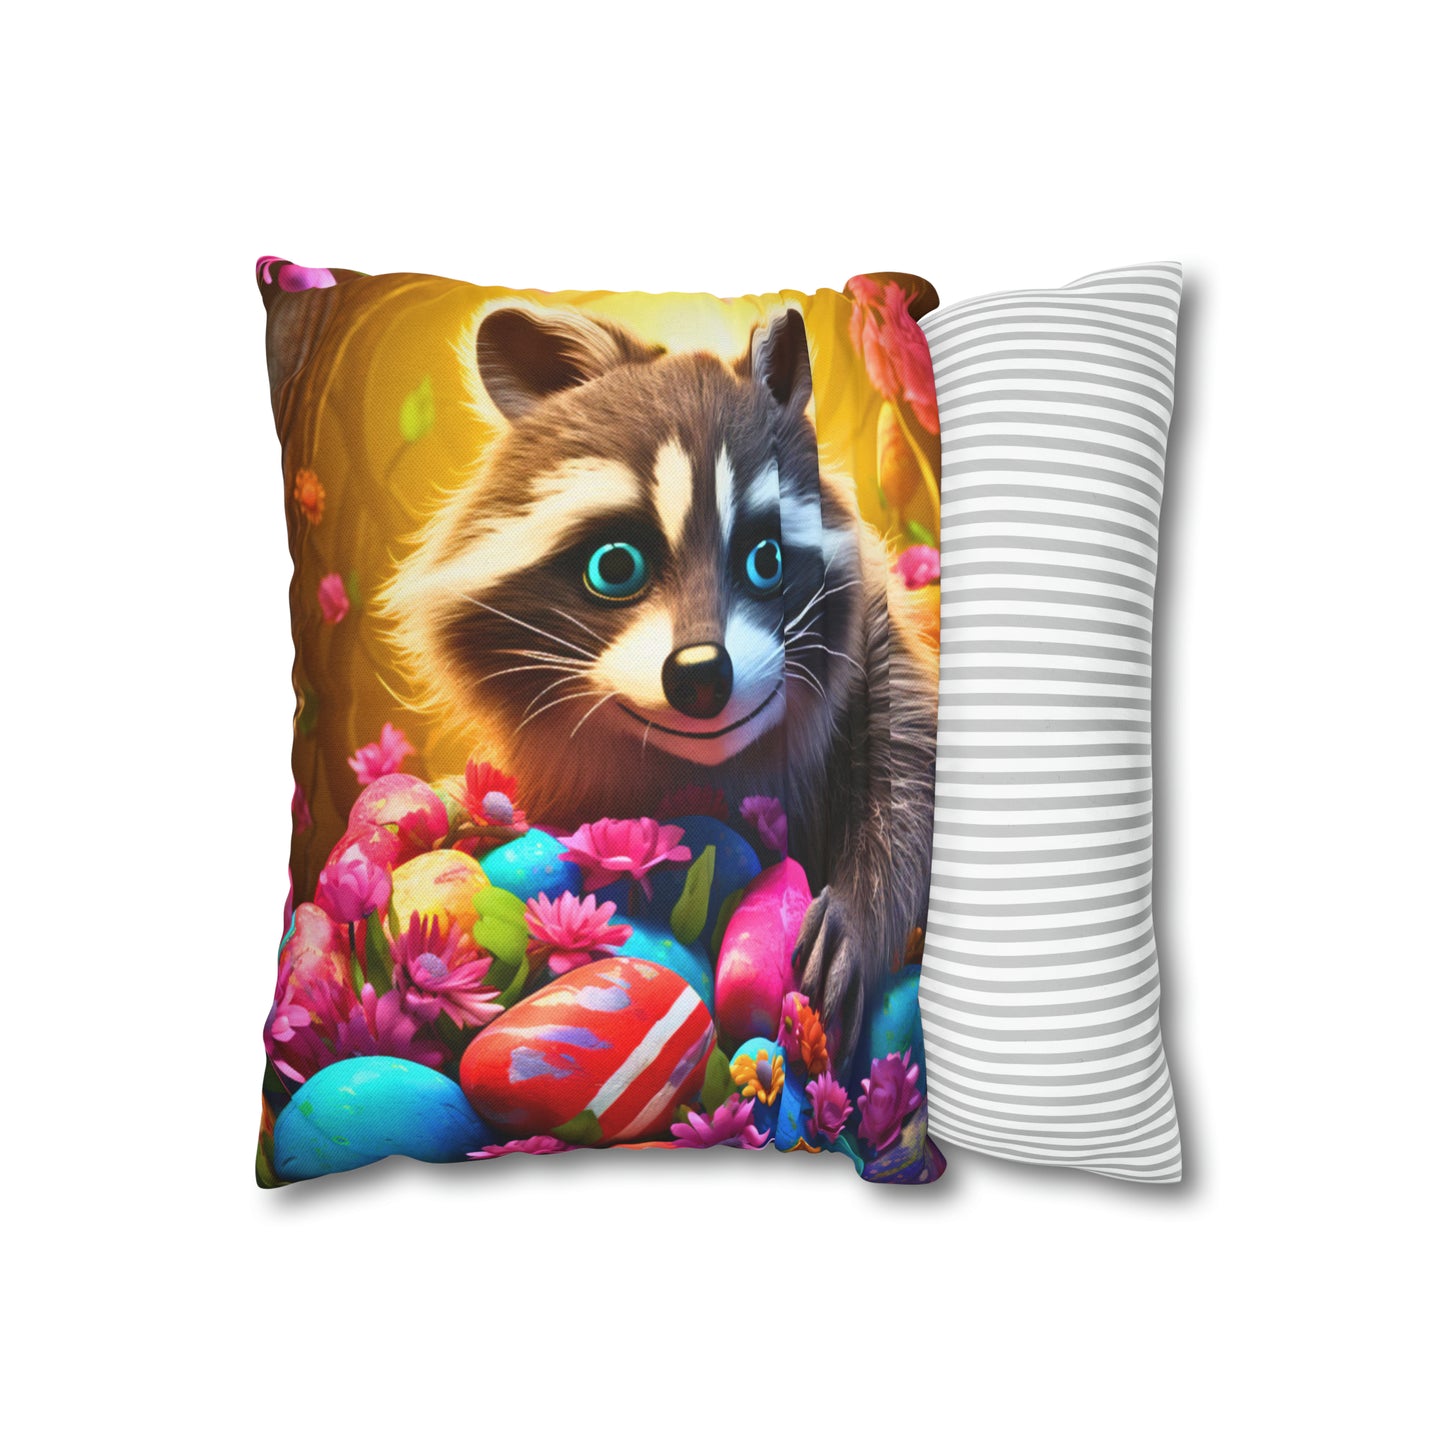 Square Pillow - The Raccoon Who Stole Easter